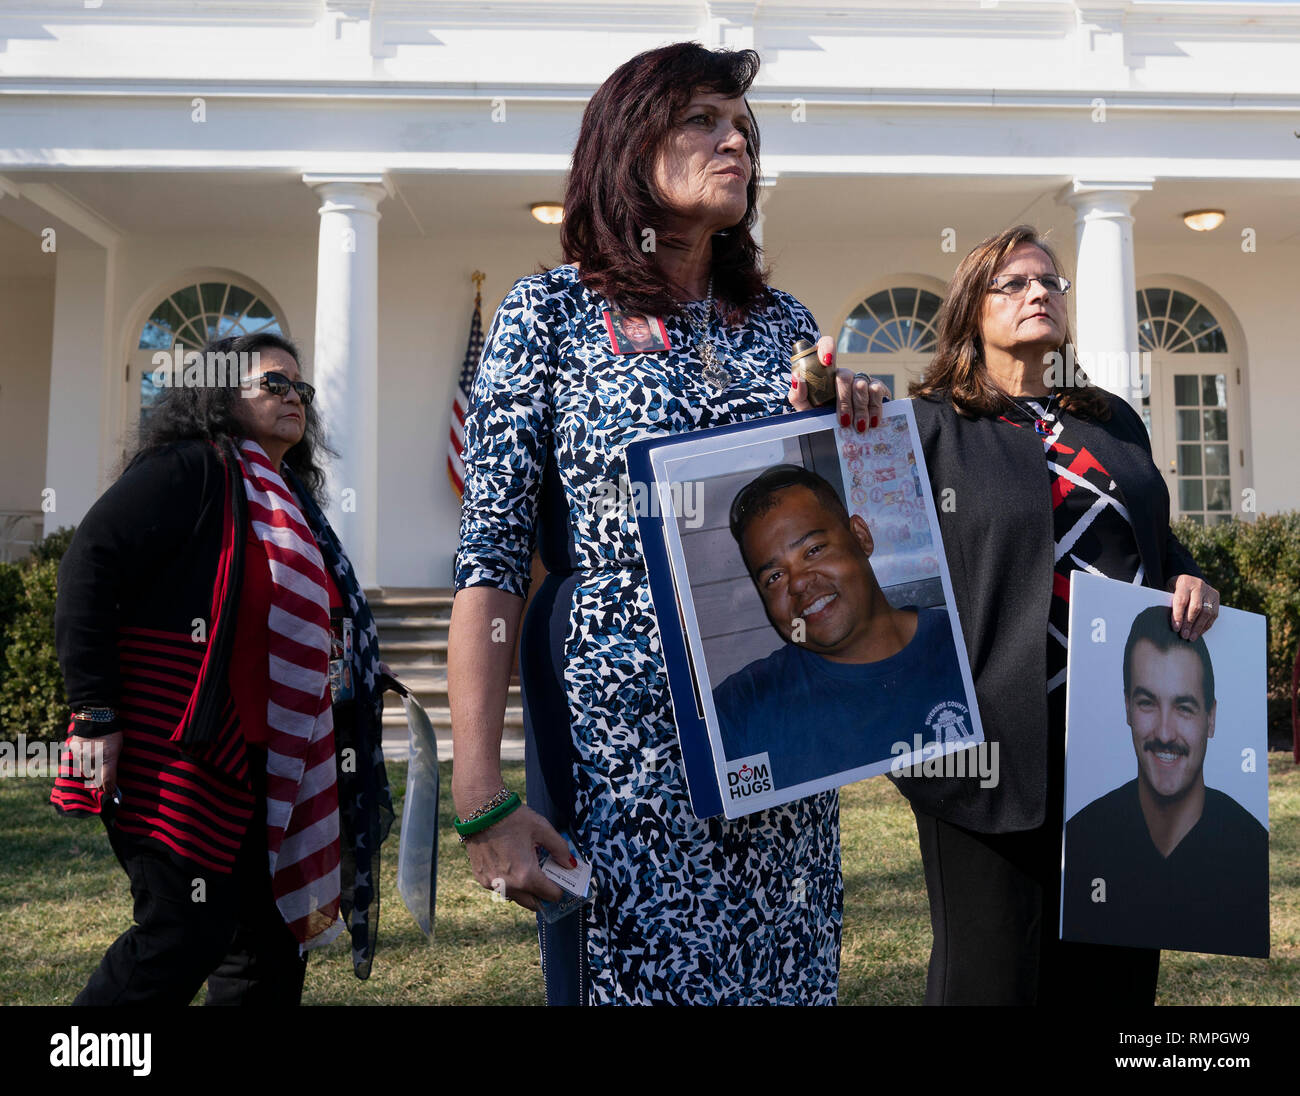 Washington DC, USA. 15th Feb, 2019. 'Angel Mothers' Angie Marfin Vargas(L), Sabine Durden(C) and Agnes Gibboney(R), who allegedly who lost loved ones to crime committed by illegal aliens speak to reporters after United States President Donald J. Trump declared a National Emergency over the southern border and the need for border security in the Rose Garden of the White House in Washington, DC on Friday, February 15, 2019. Credit: Chris Kleponis / Pool via CNP /MediaPunch Credit: MediaPunch Inc/Alamy Live News Stock Photo